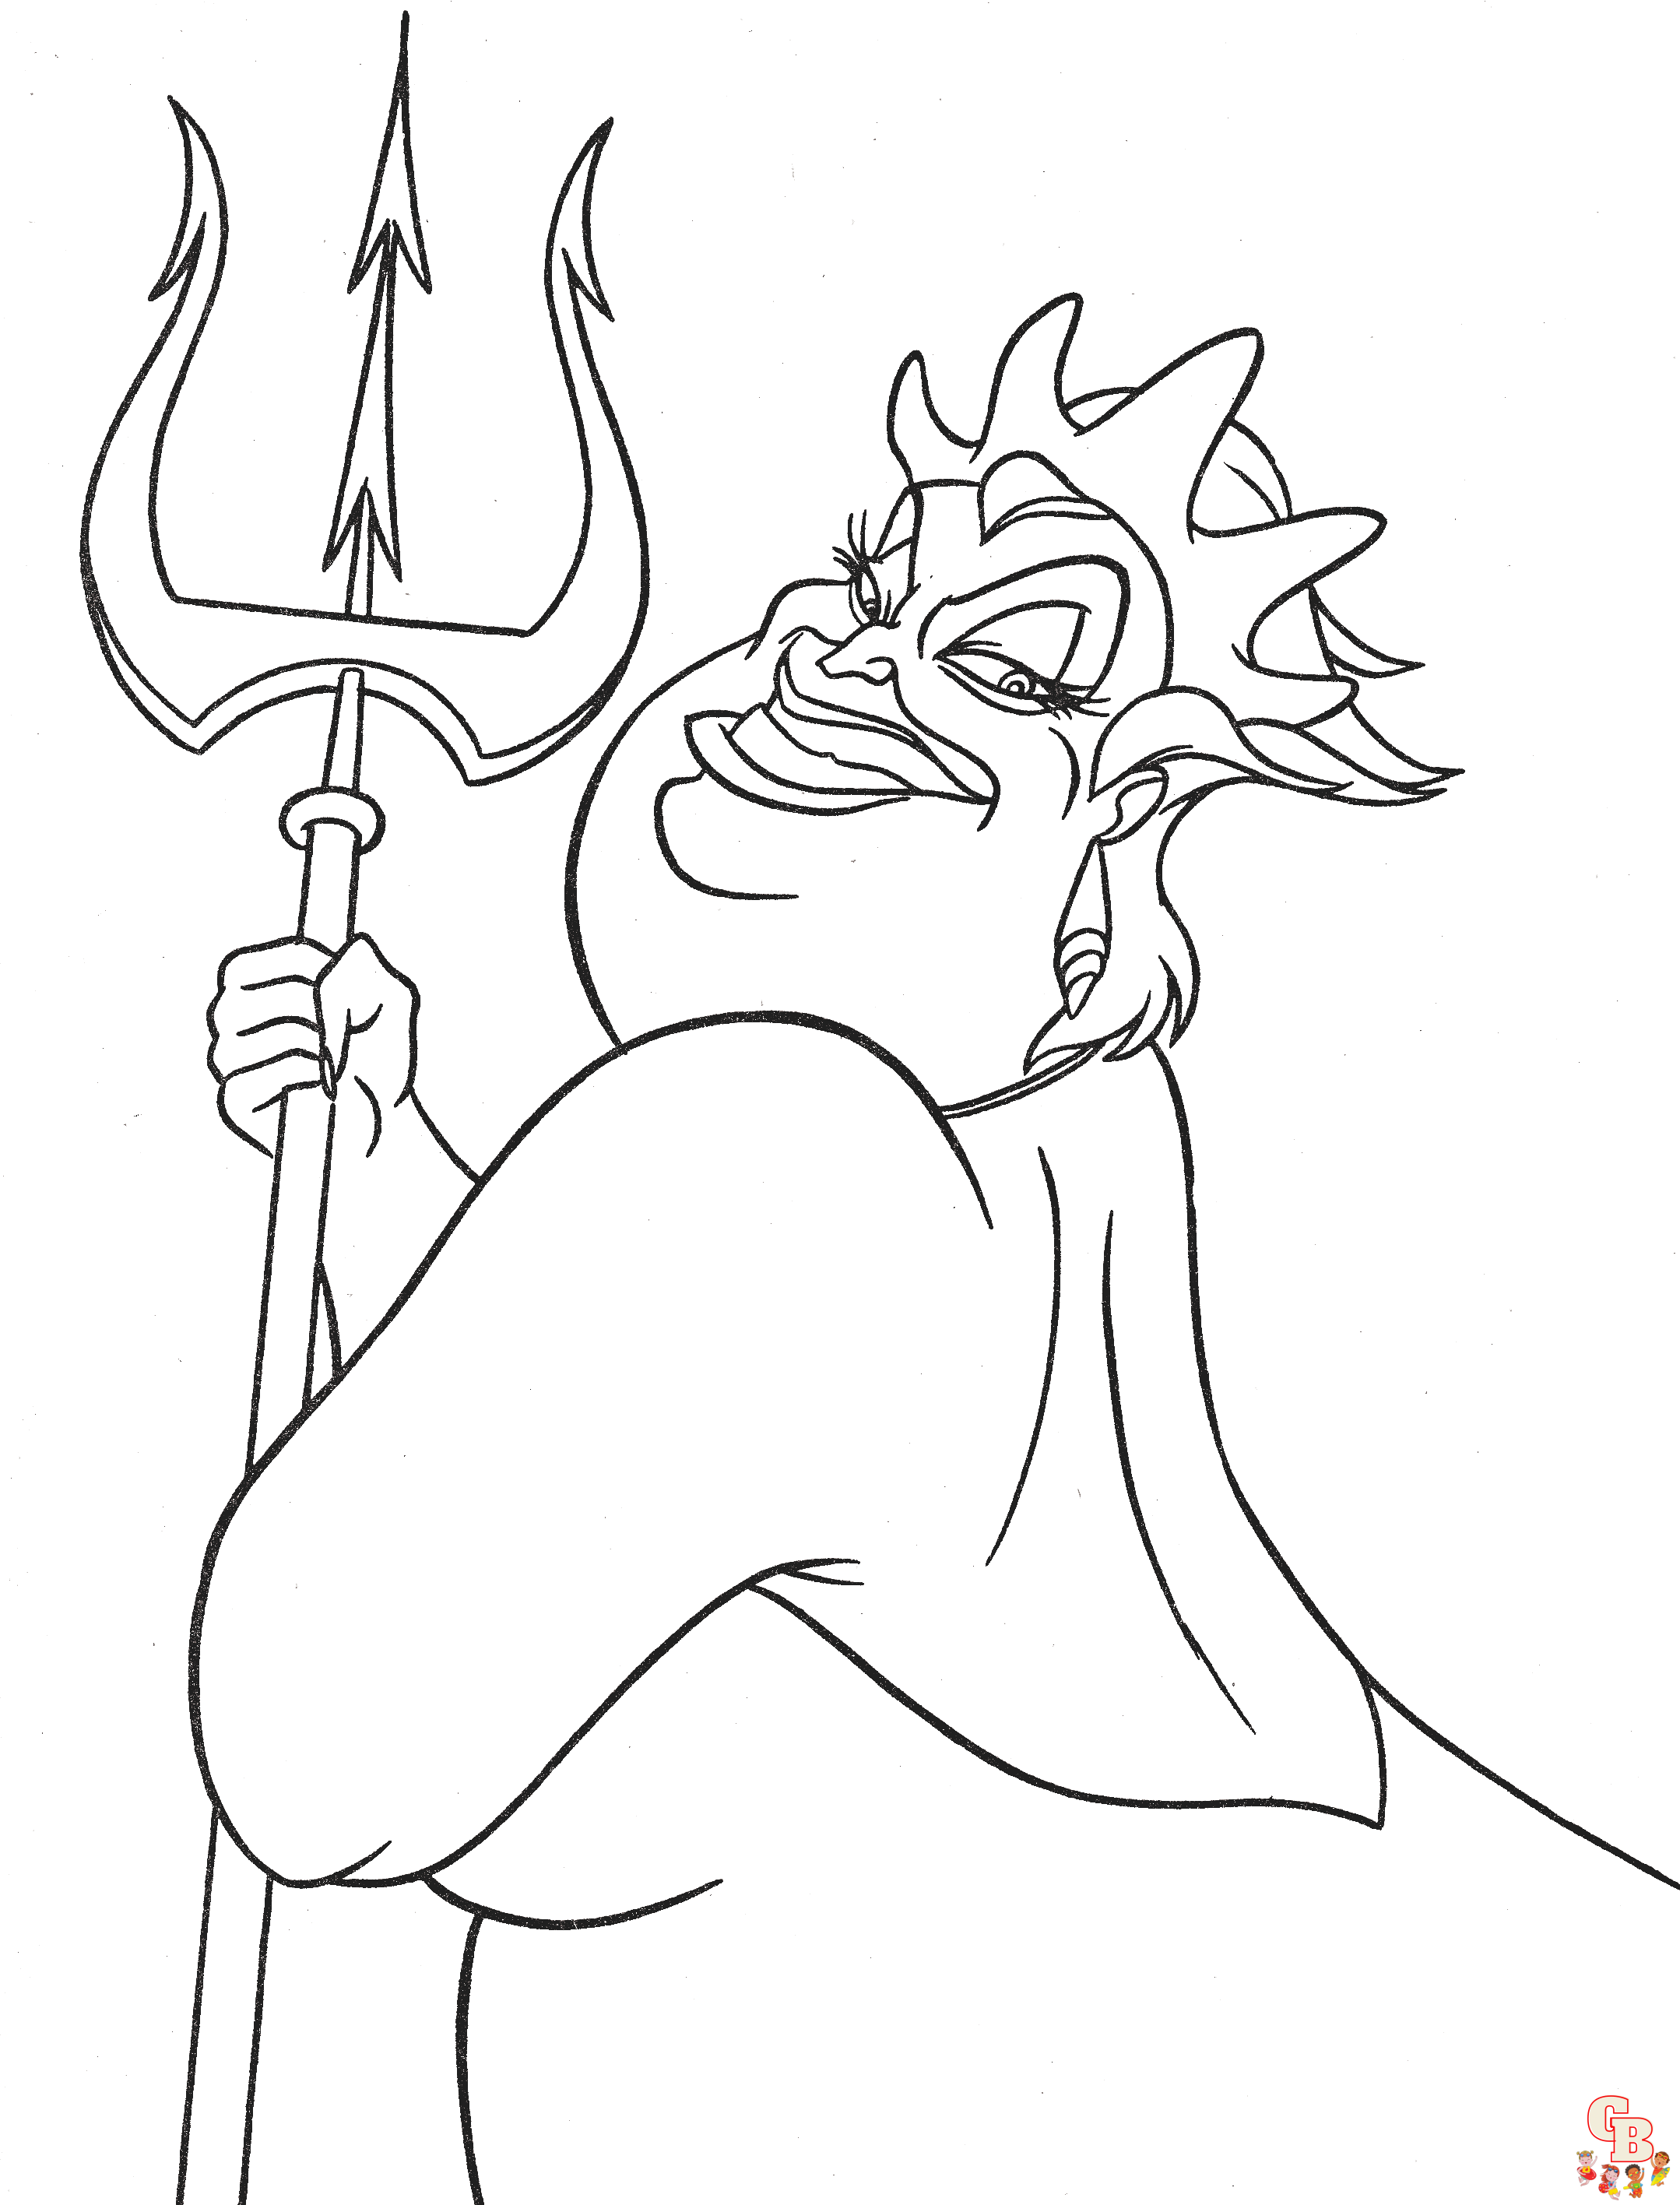 Printable ursula coloring pages free for kids and adults